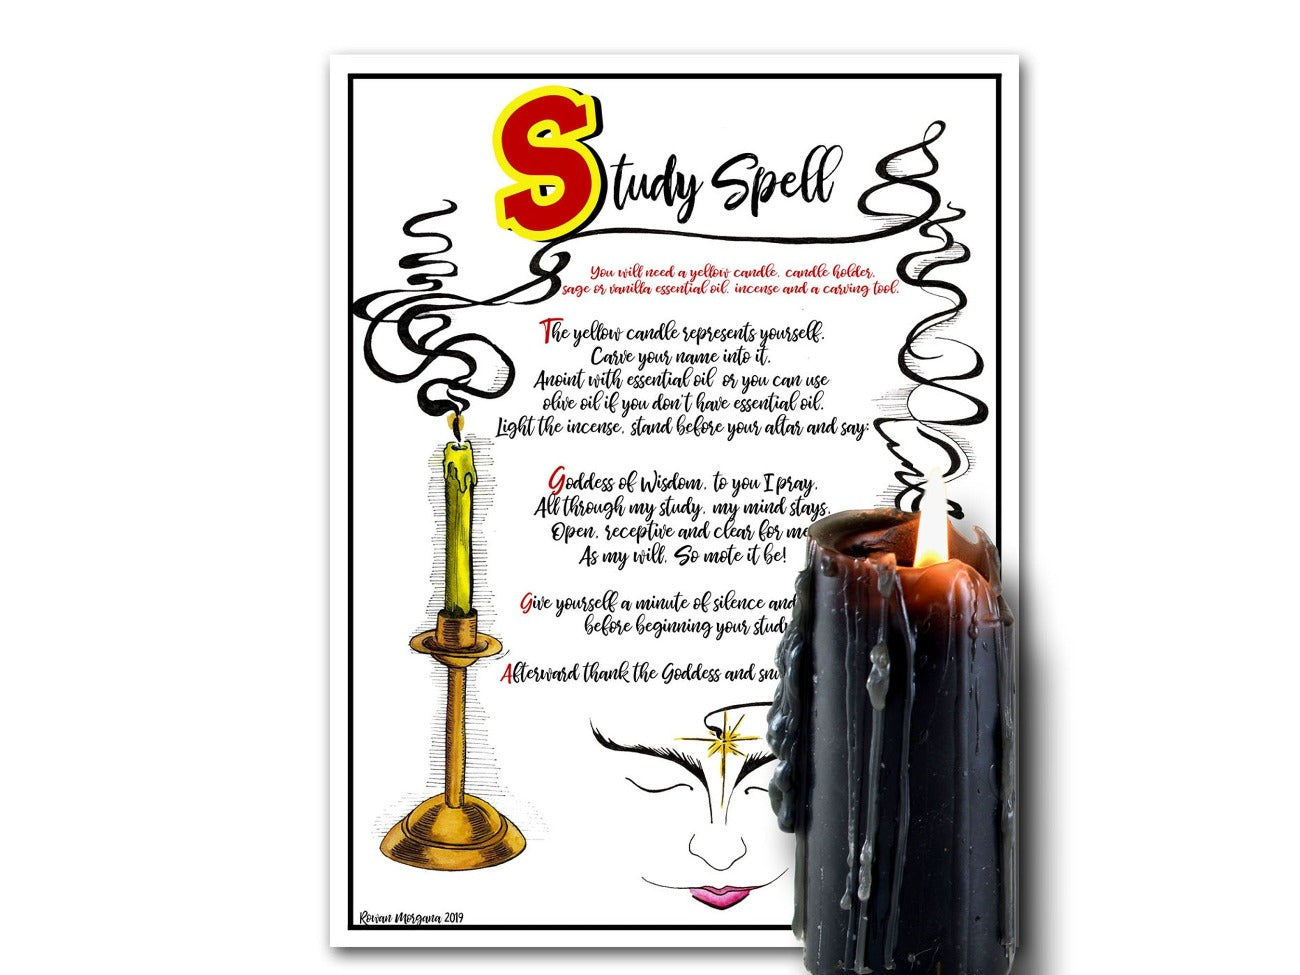 STUDY SPELL Charmed Style, Learning Spell For Good Marks, Memory Spell, Wicca Witchcraft Student Magic, Witch Book of Shadows Printable - Morgana Magick Spell